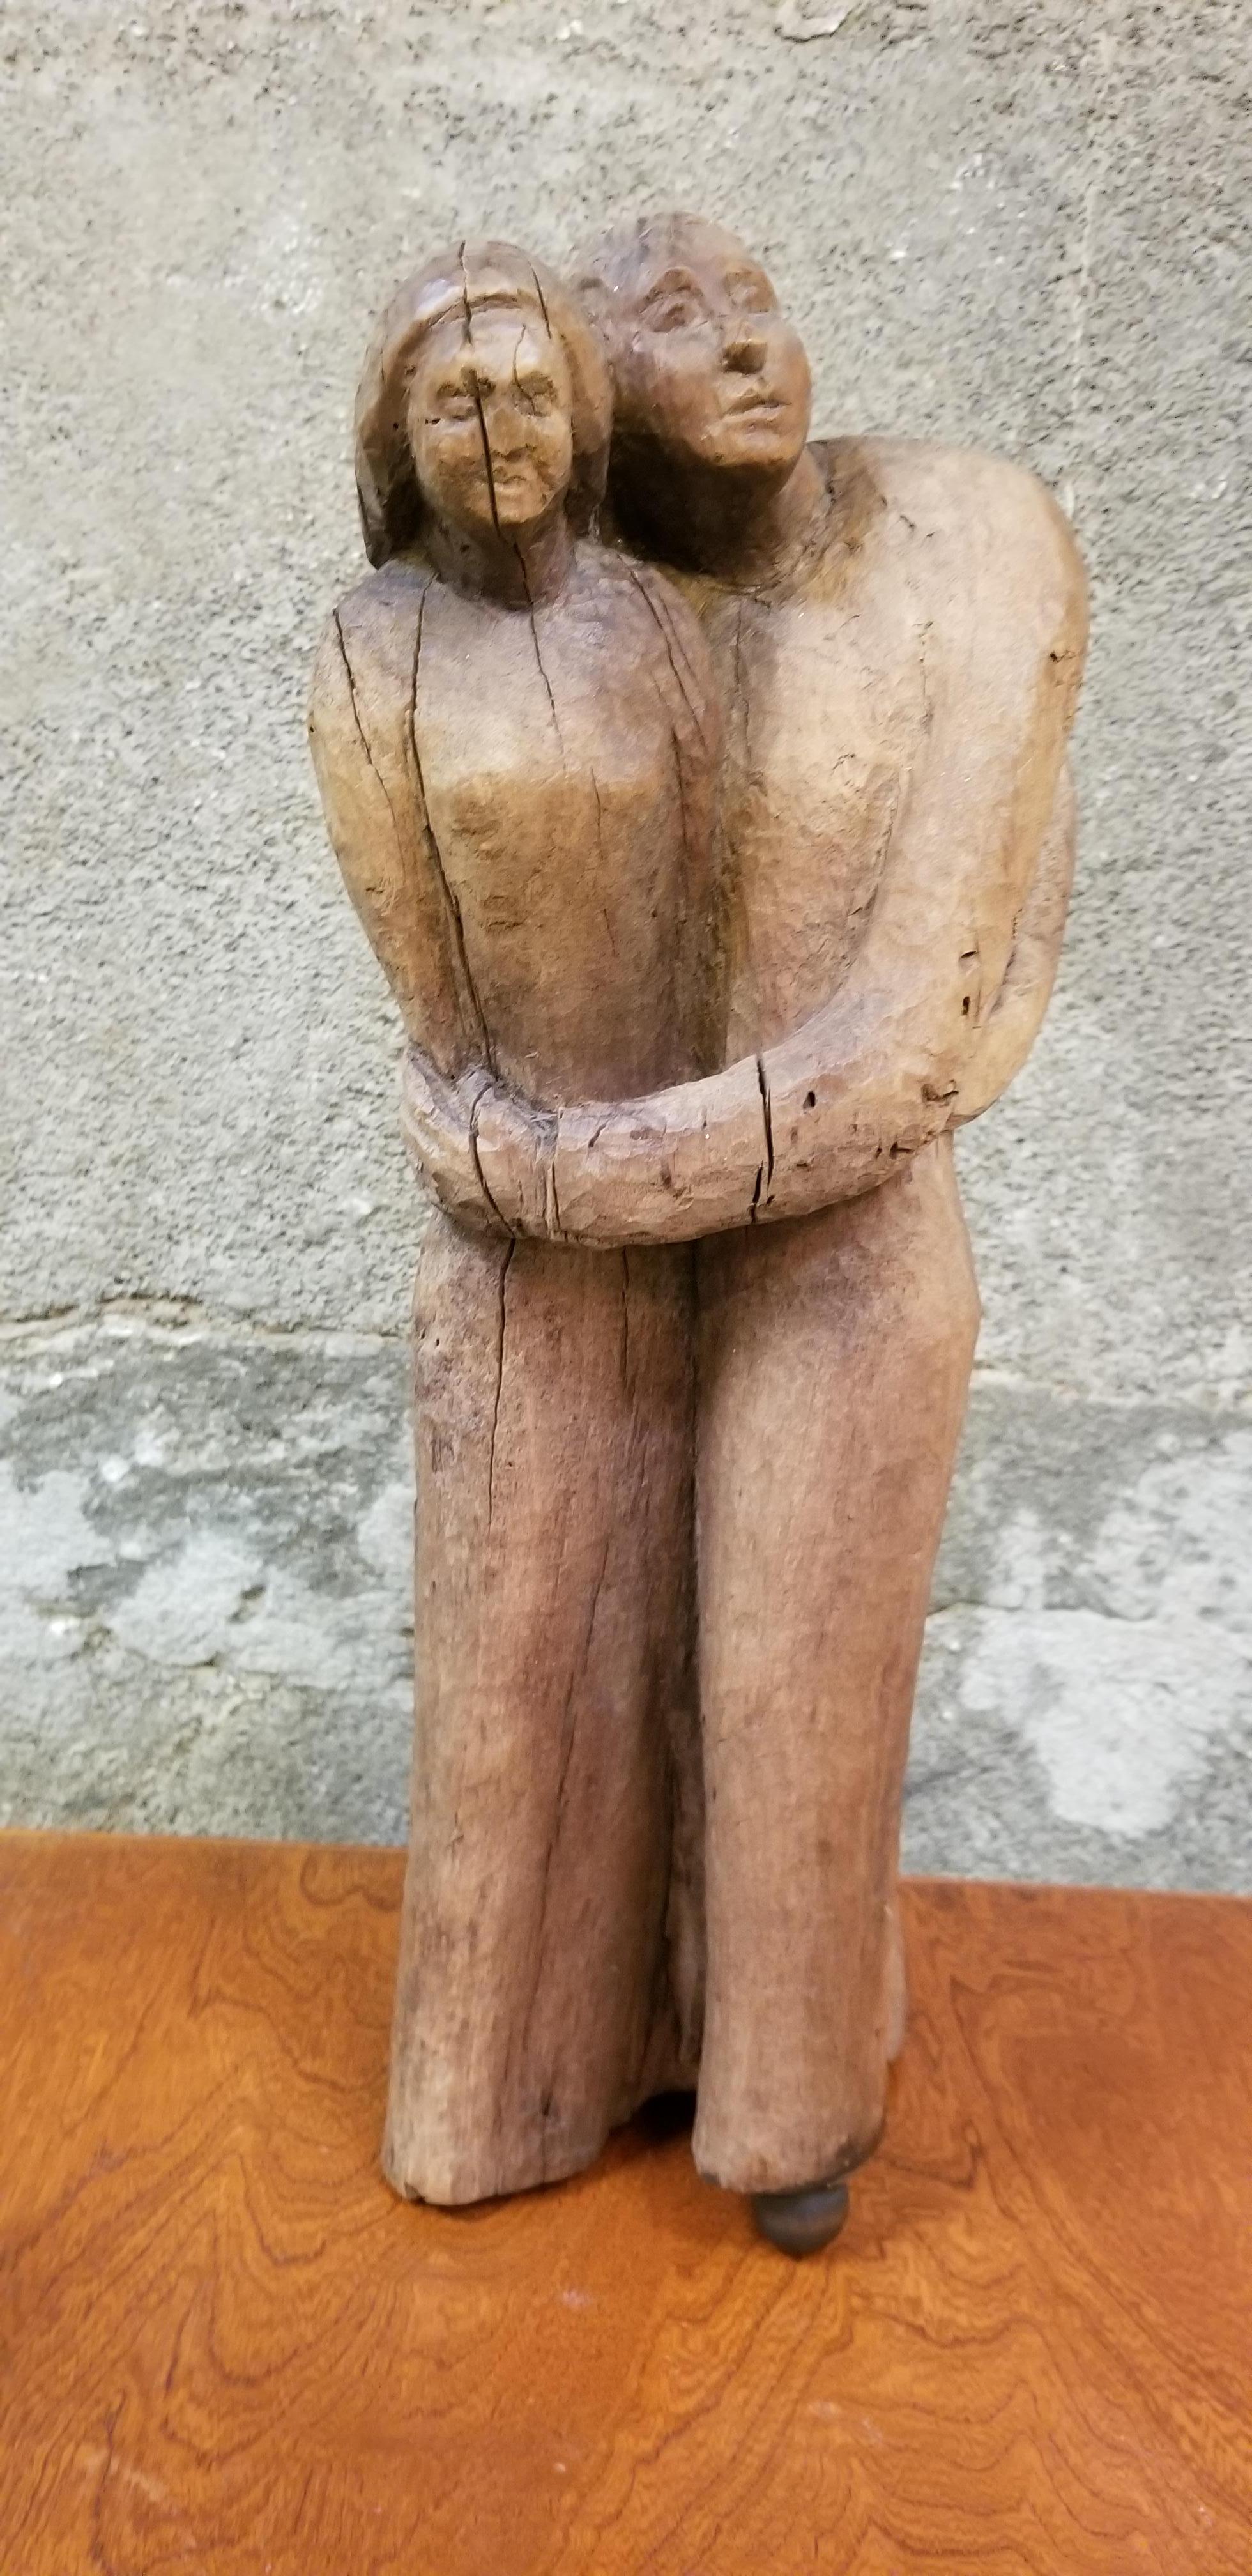 A hand carved wood sculpture of 3 standing and embracing figures. Unknown artist or age. Appears to be from the 1930s. Skilful whittled effect with strong expression to male and female figures. Measures 19.5 inches in height.